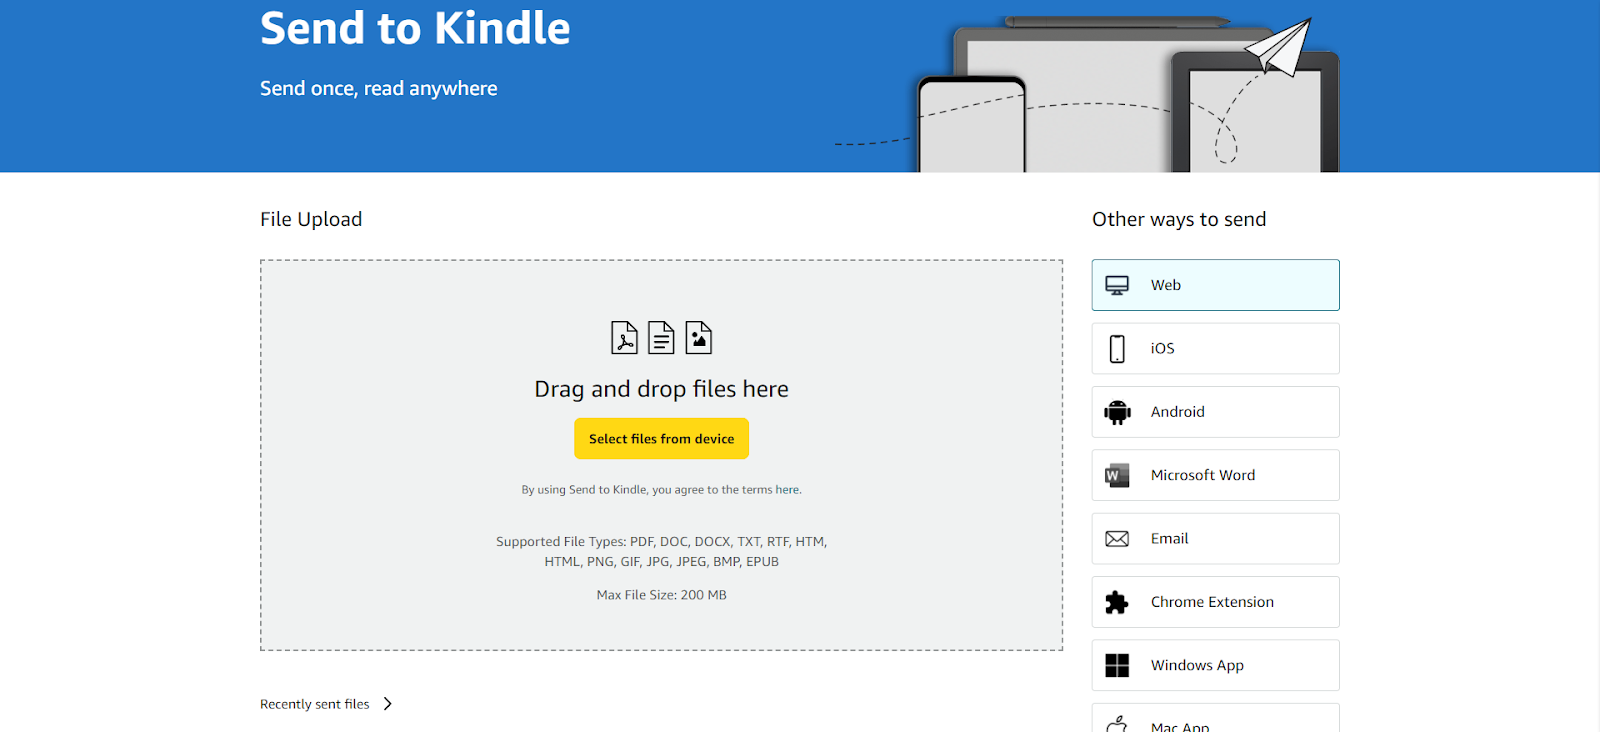 How to email documents and books to your Kindle